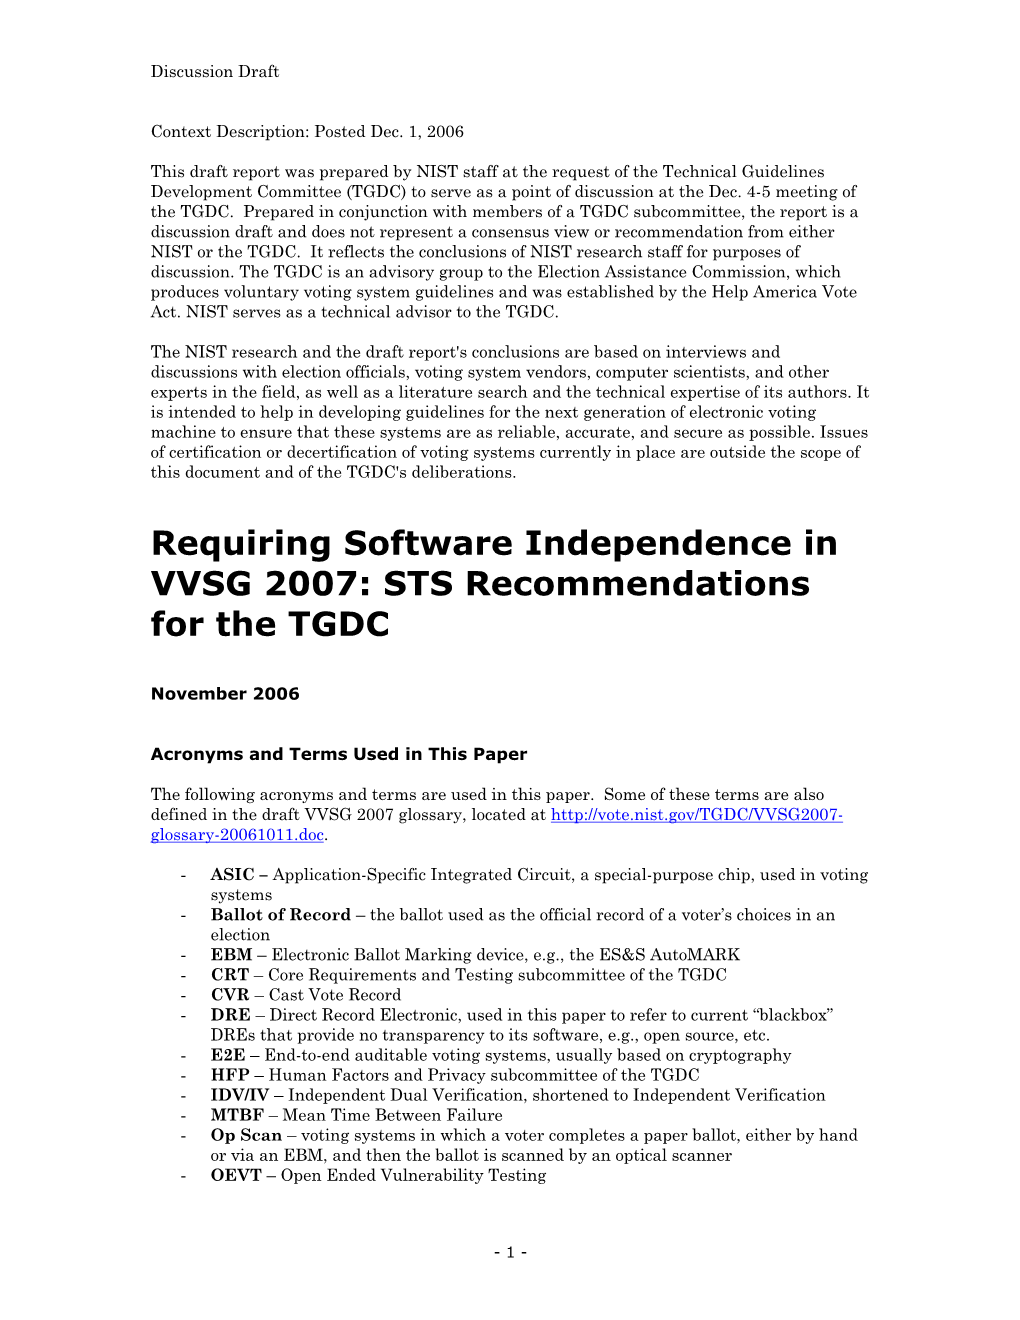 STS Recommendations for the TGDC